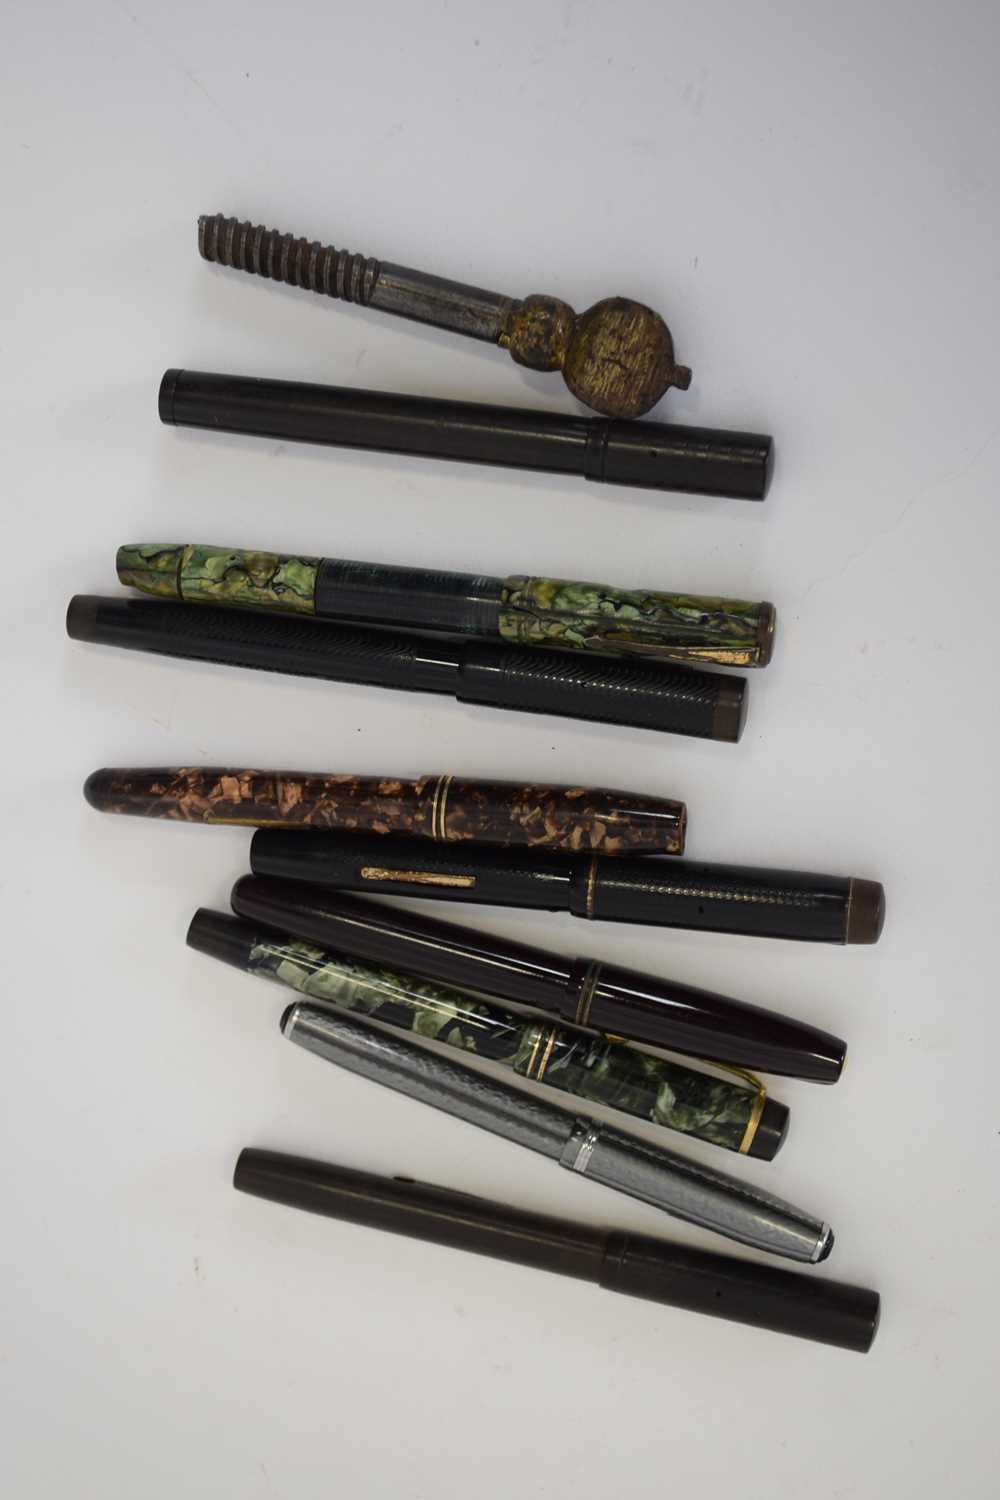 Group of fountain pens by De la Rue and others, some with gold nibs